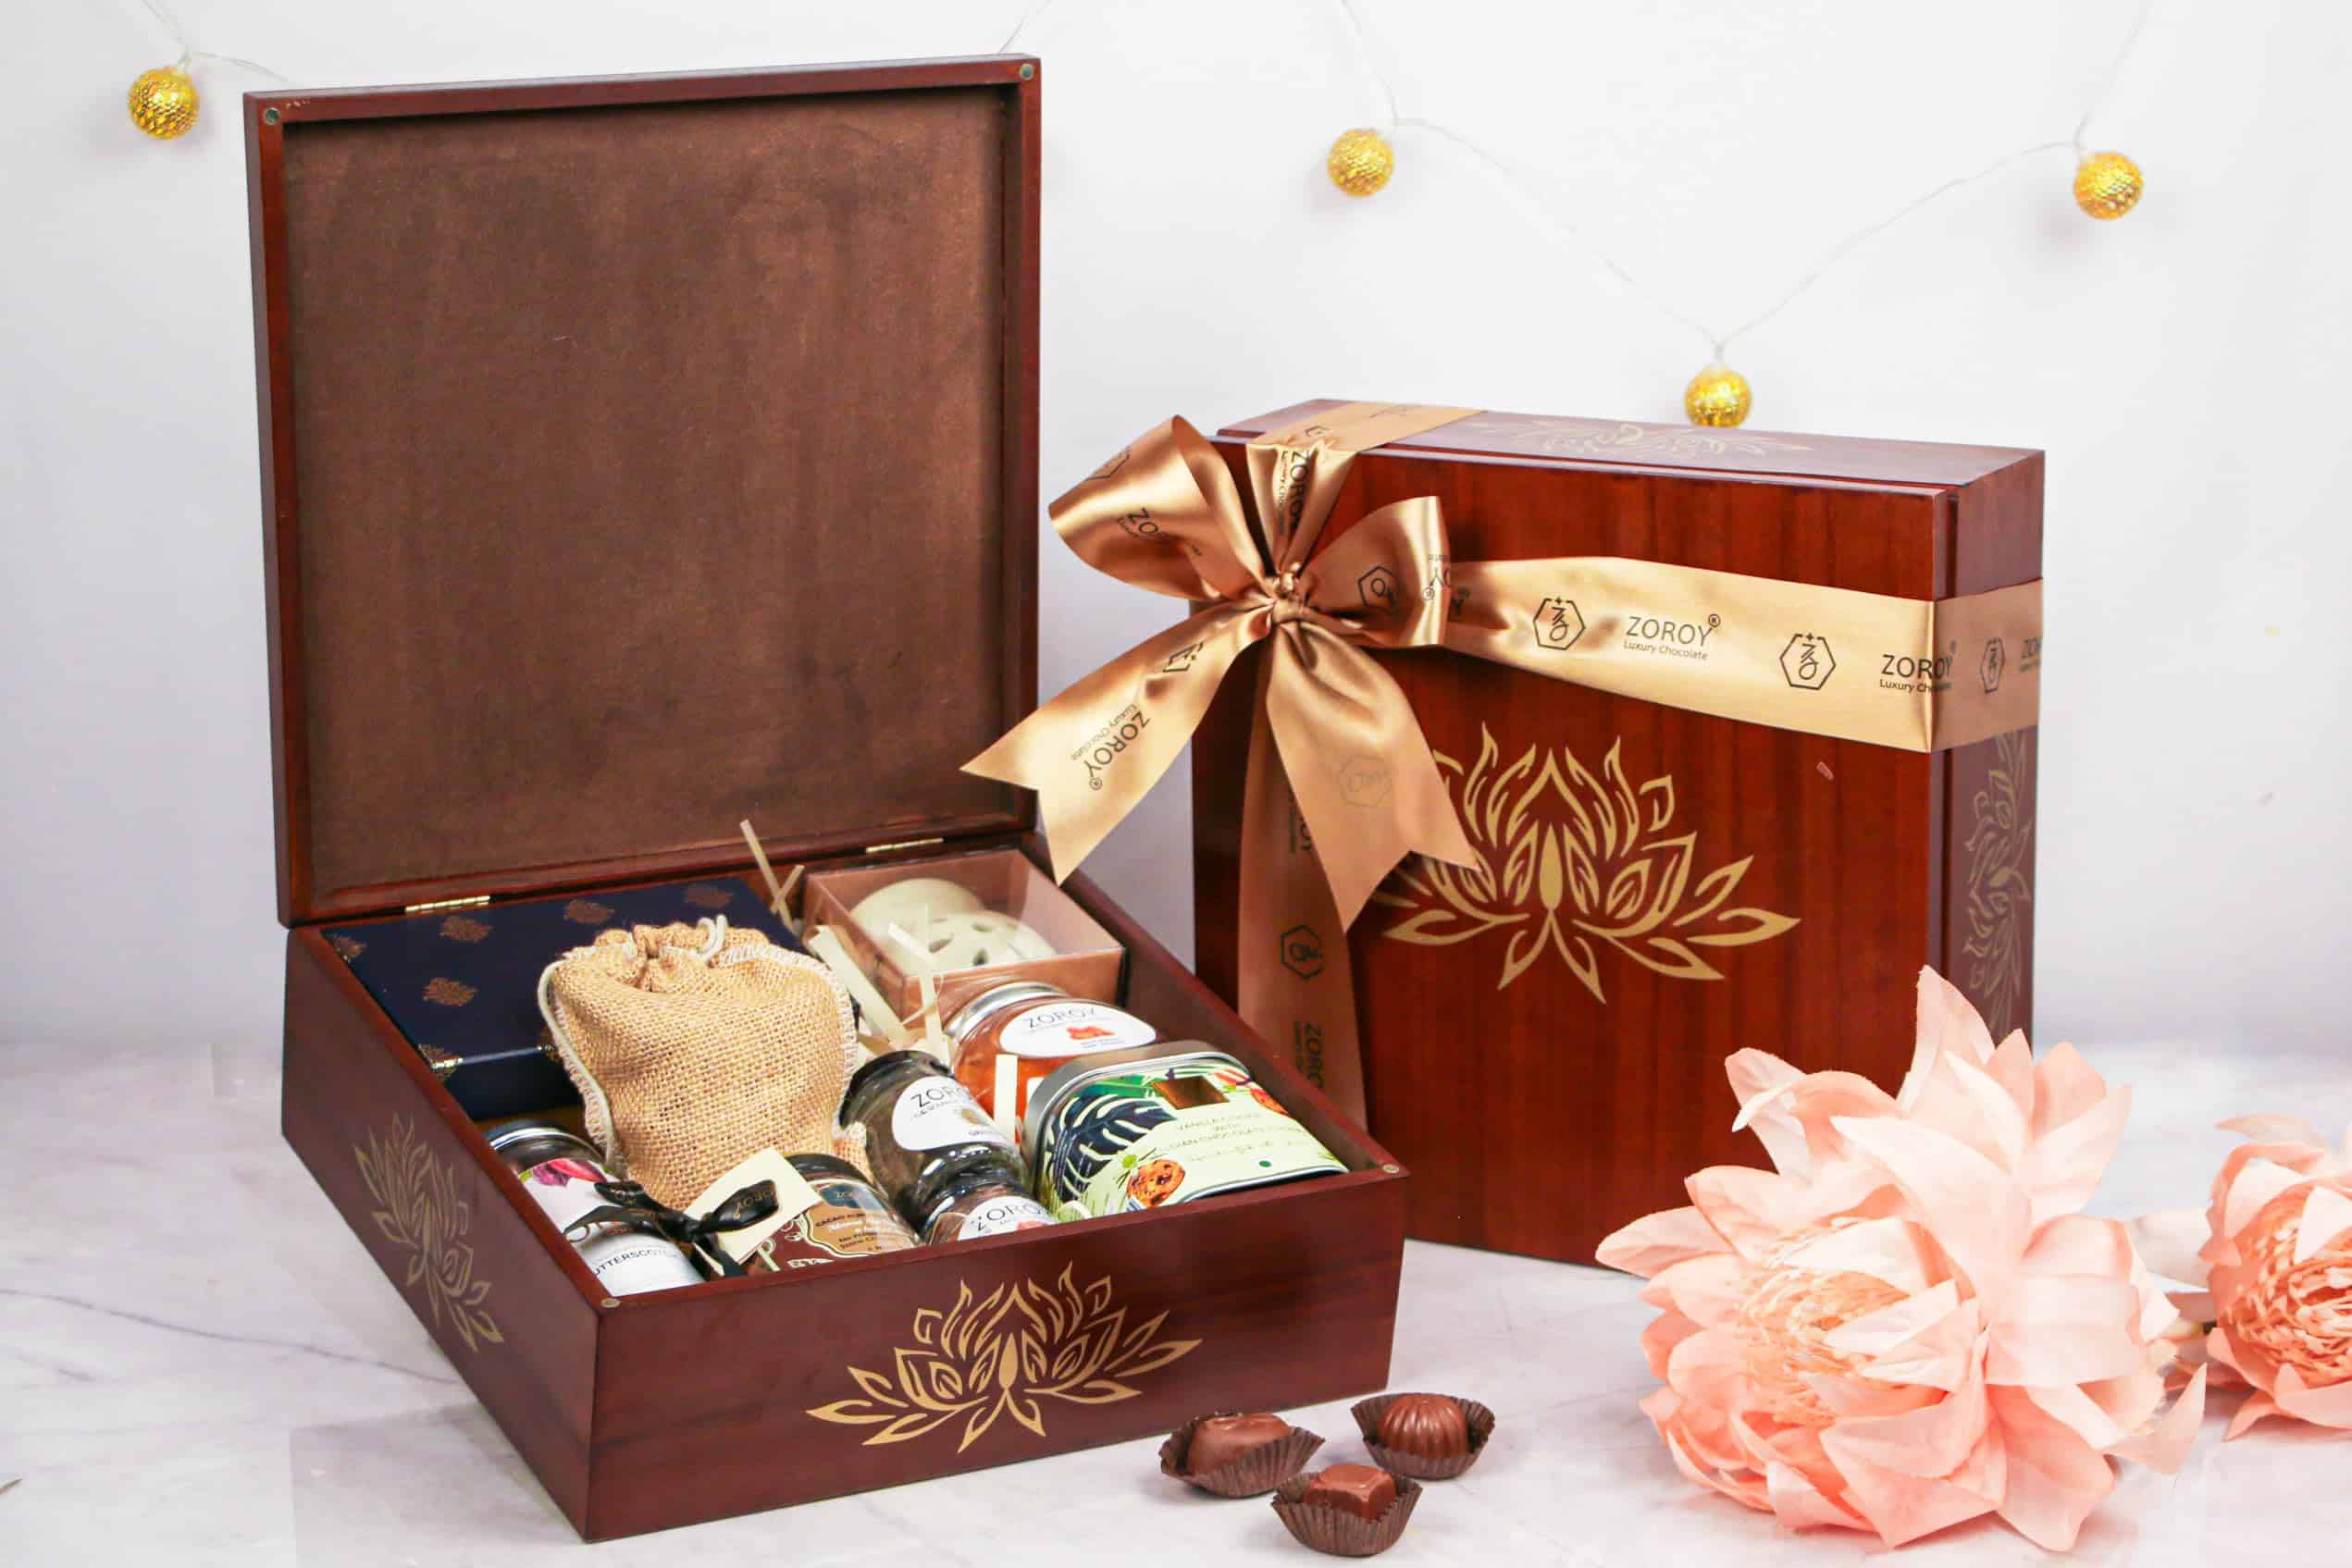 Gifts for clients - Corporate Gifts for Diwali – Chocorish